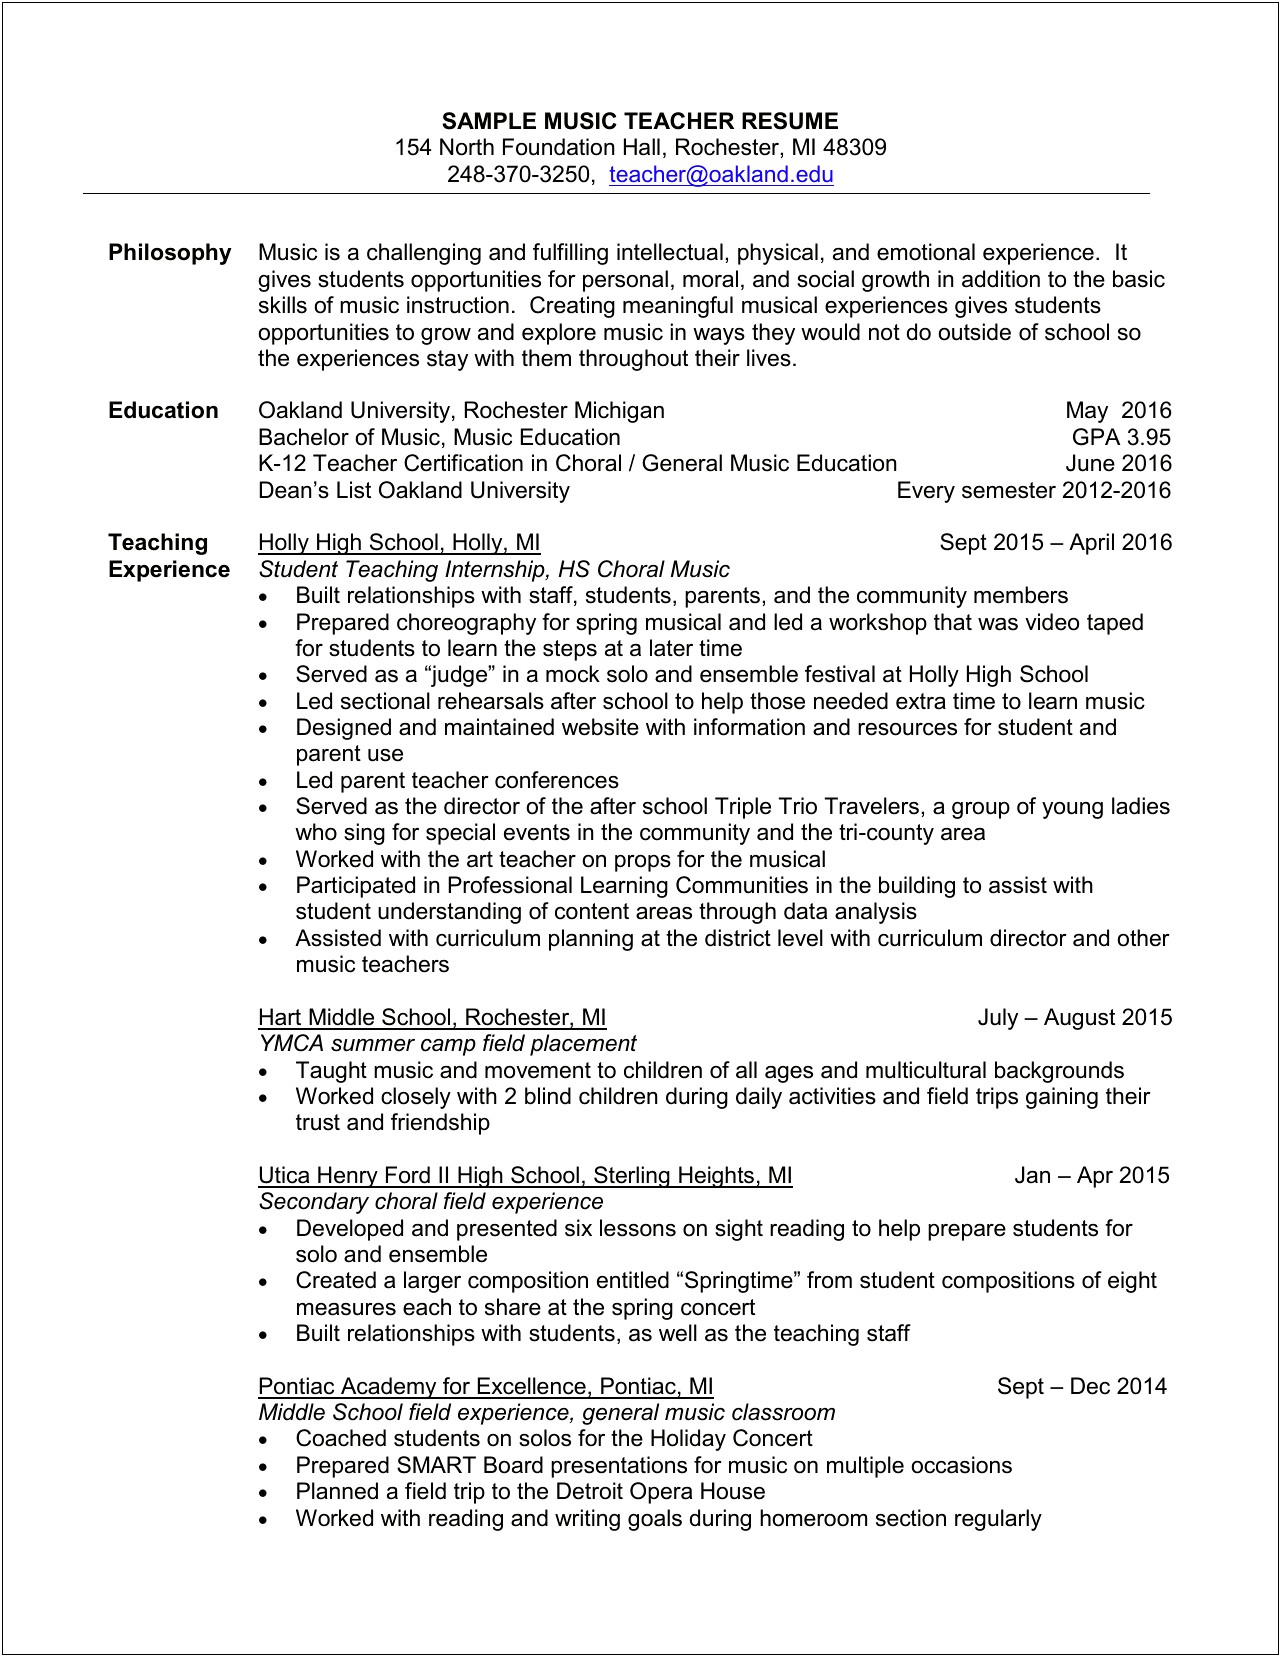 Personal Resume For High School Student